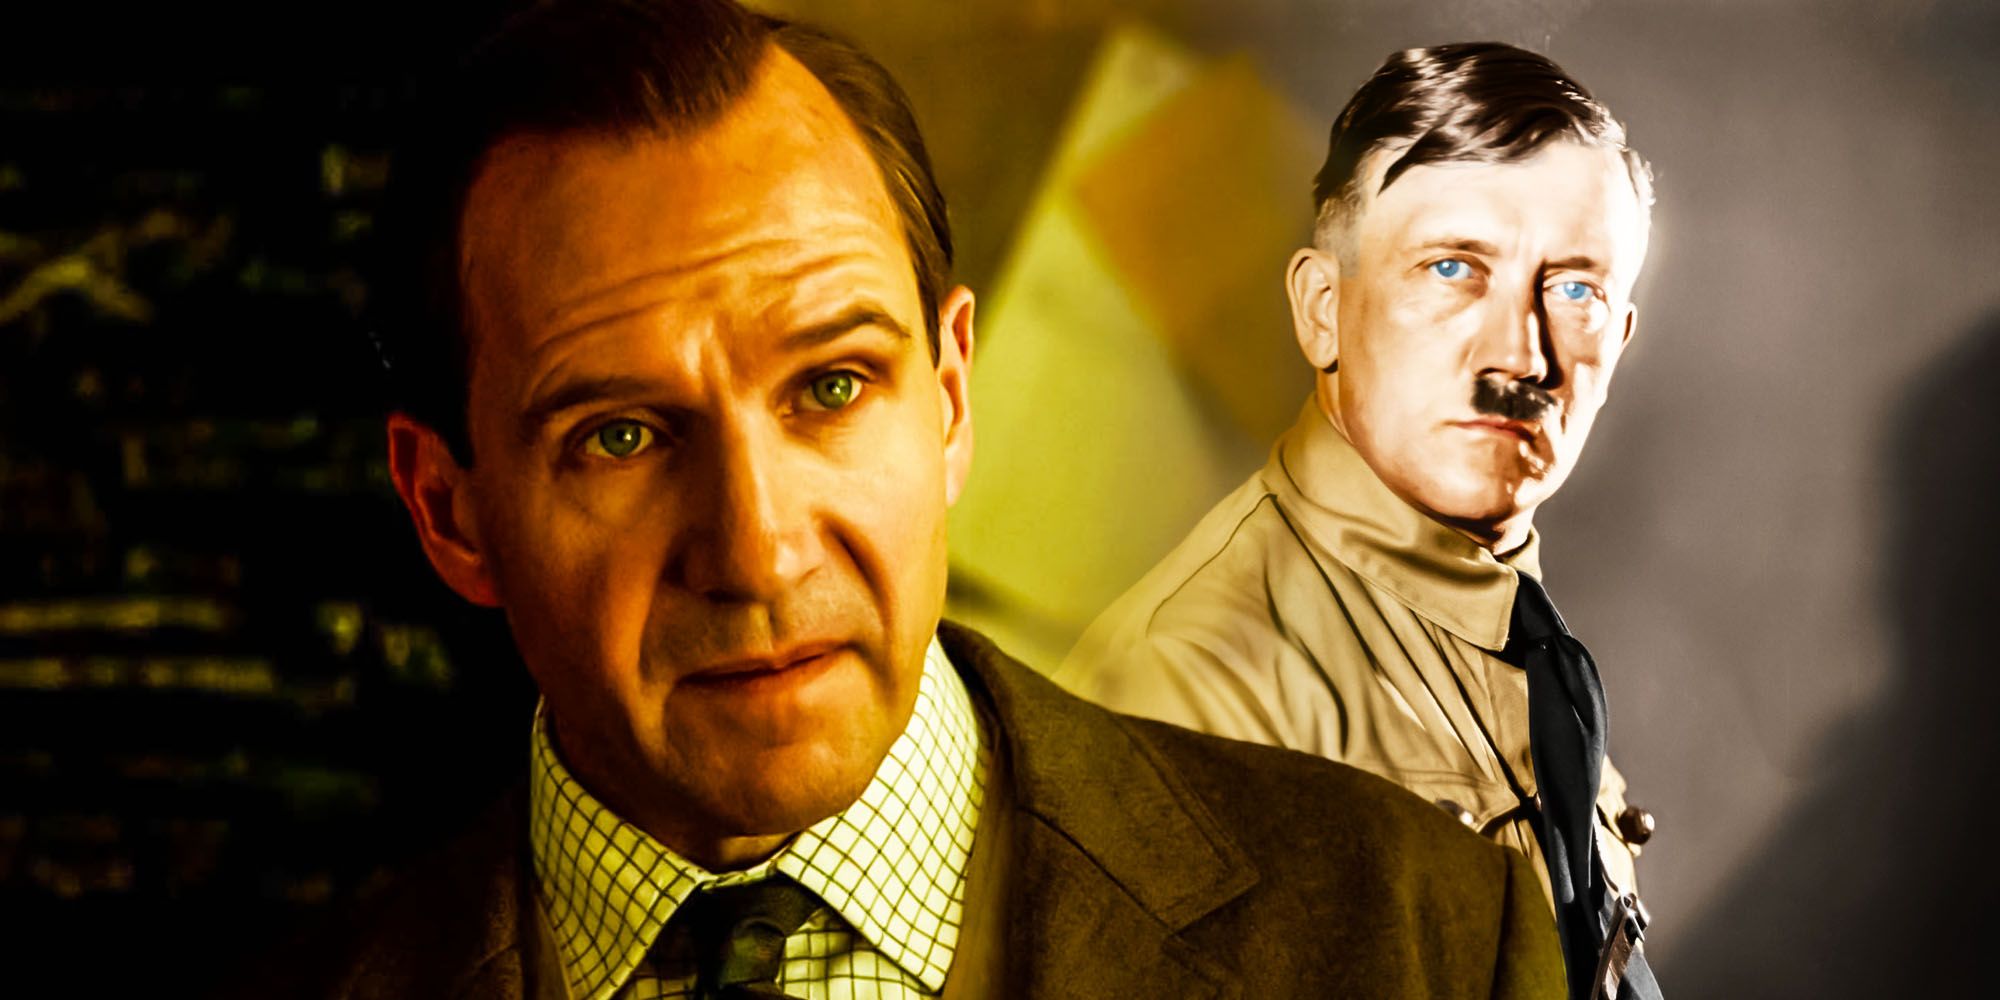 the Kings man bombing risks killing its perfect sequel Hitler